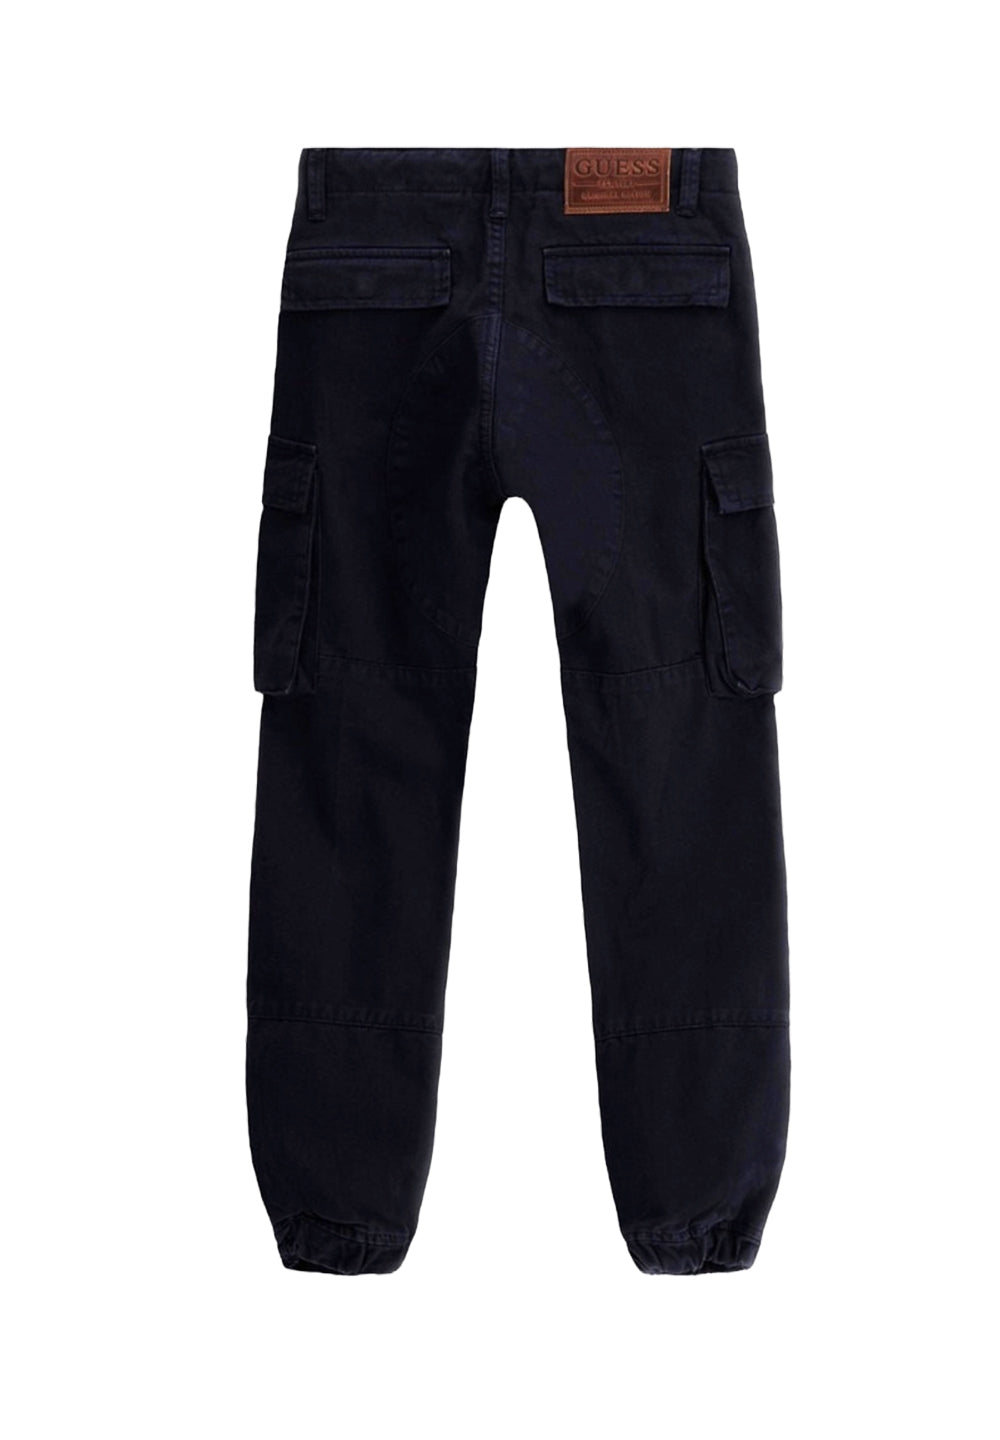 Blue trousers for boy